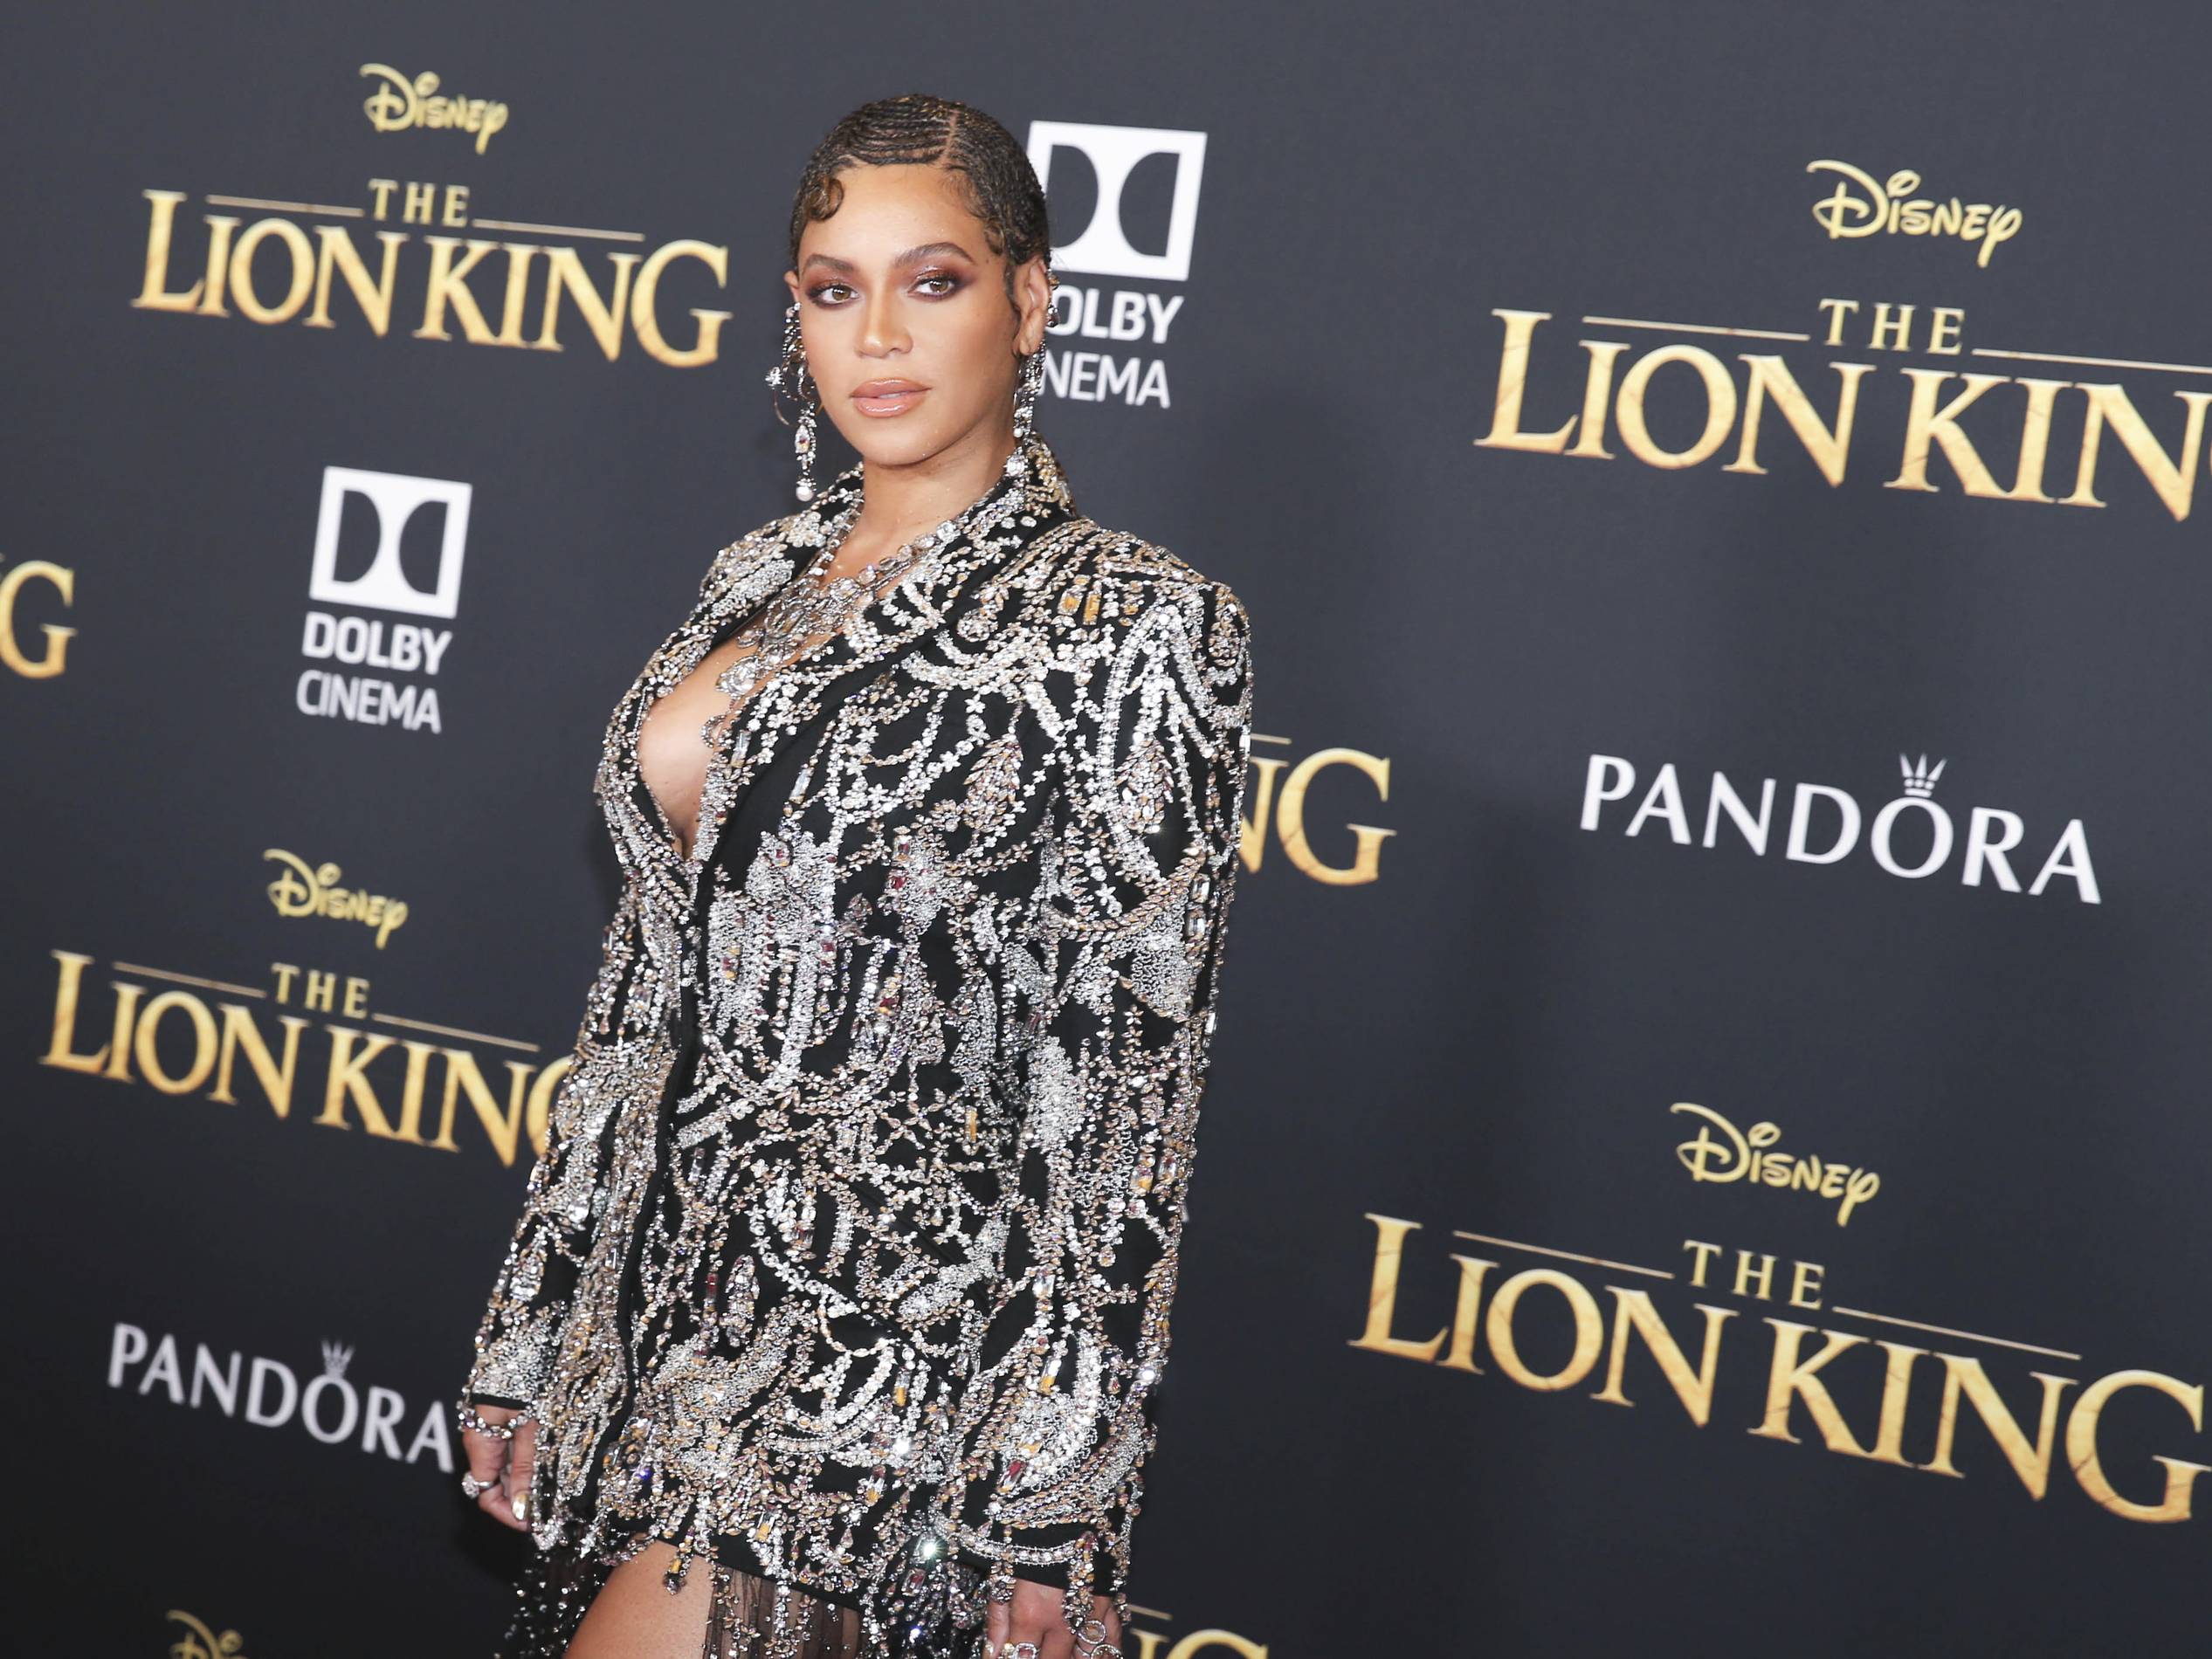 Beyonce at The Lion King premiere.